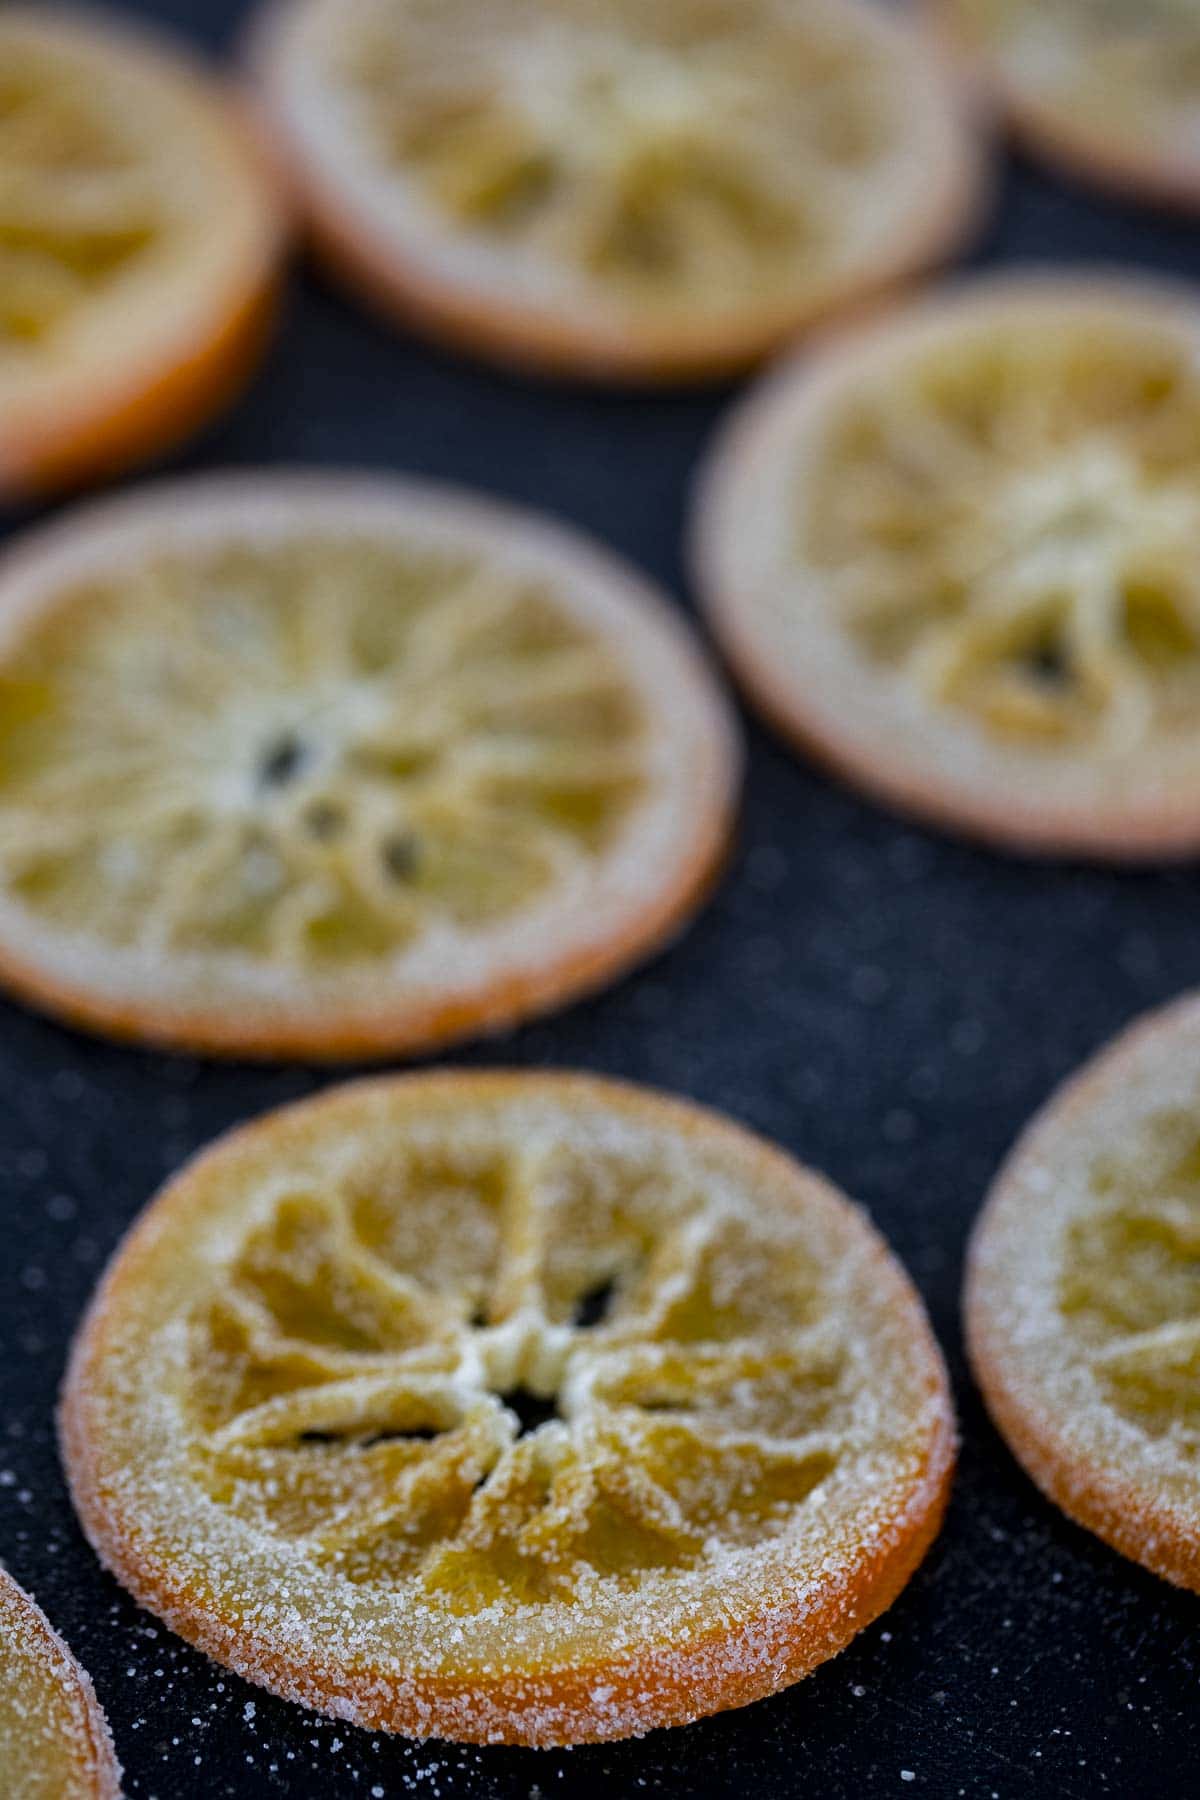 Orange slices coated in sugar and laying flat to dry.